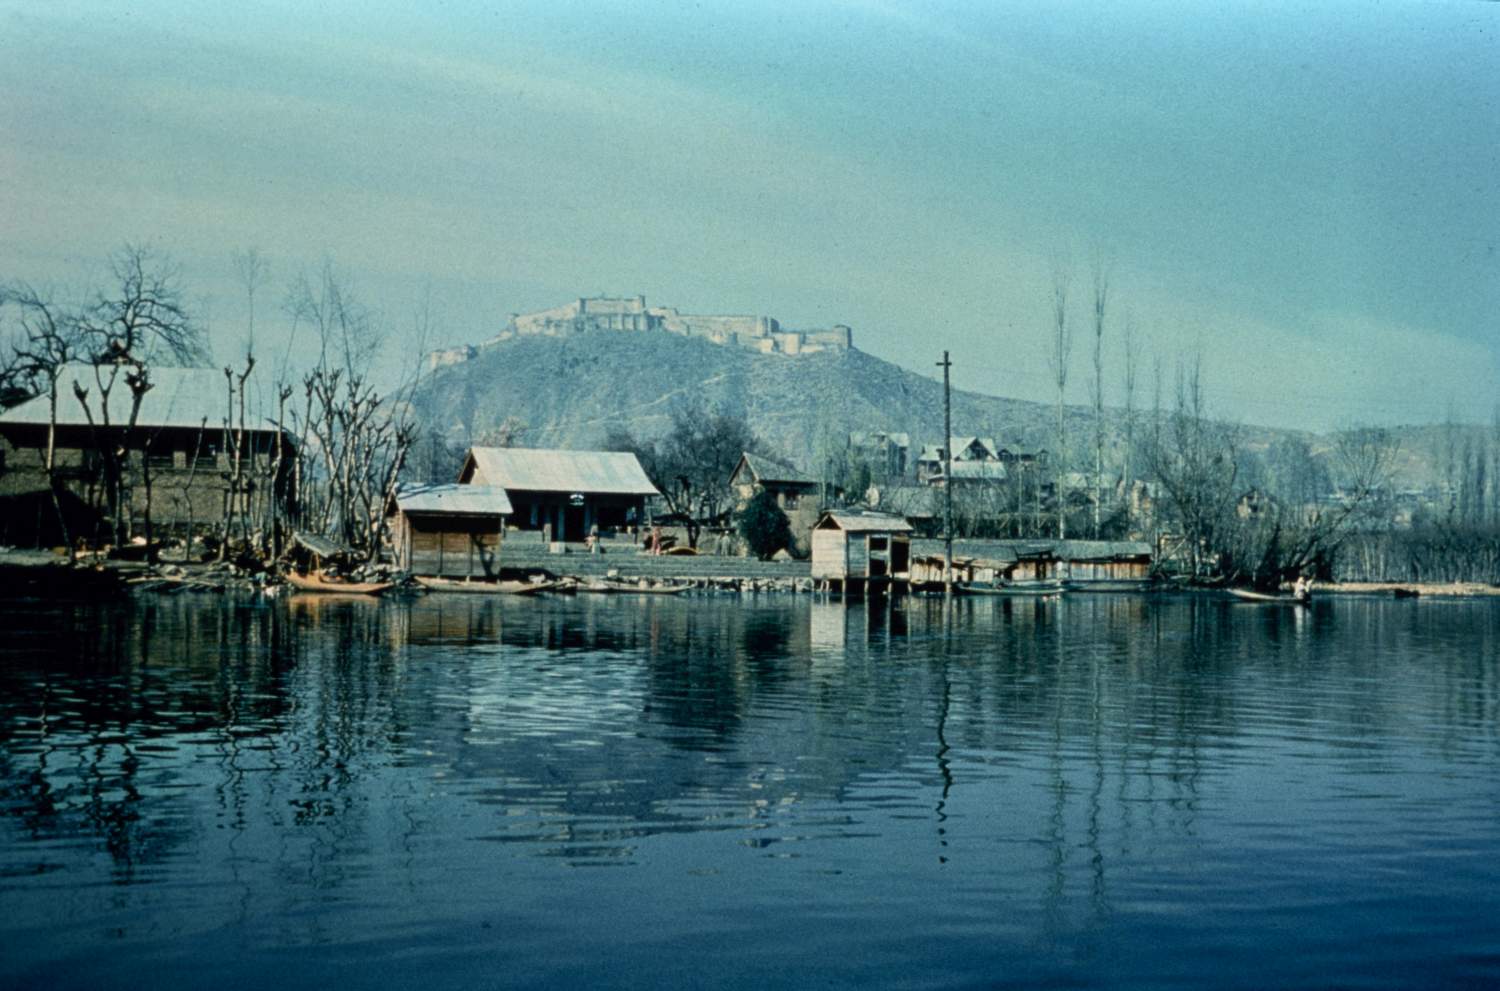 Structures along shore of Dal Lake. Hari Parabat is visible in background.